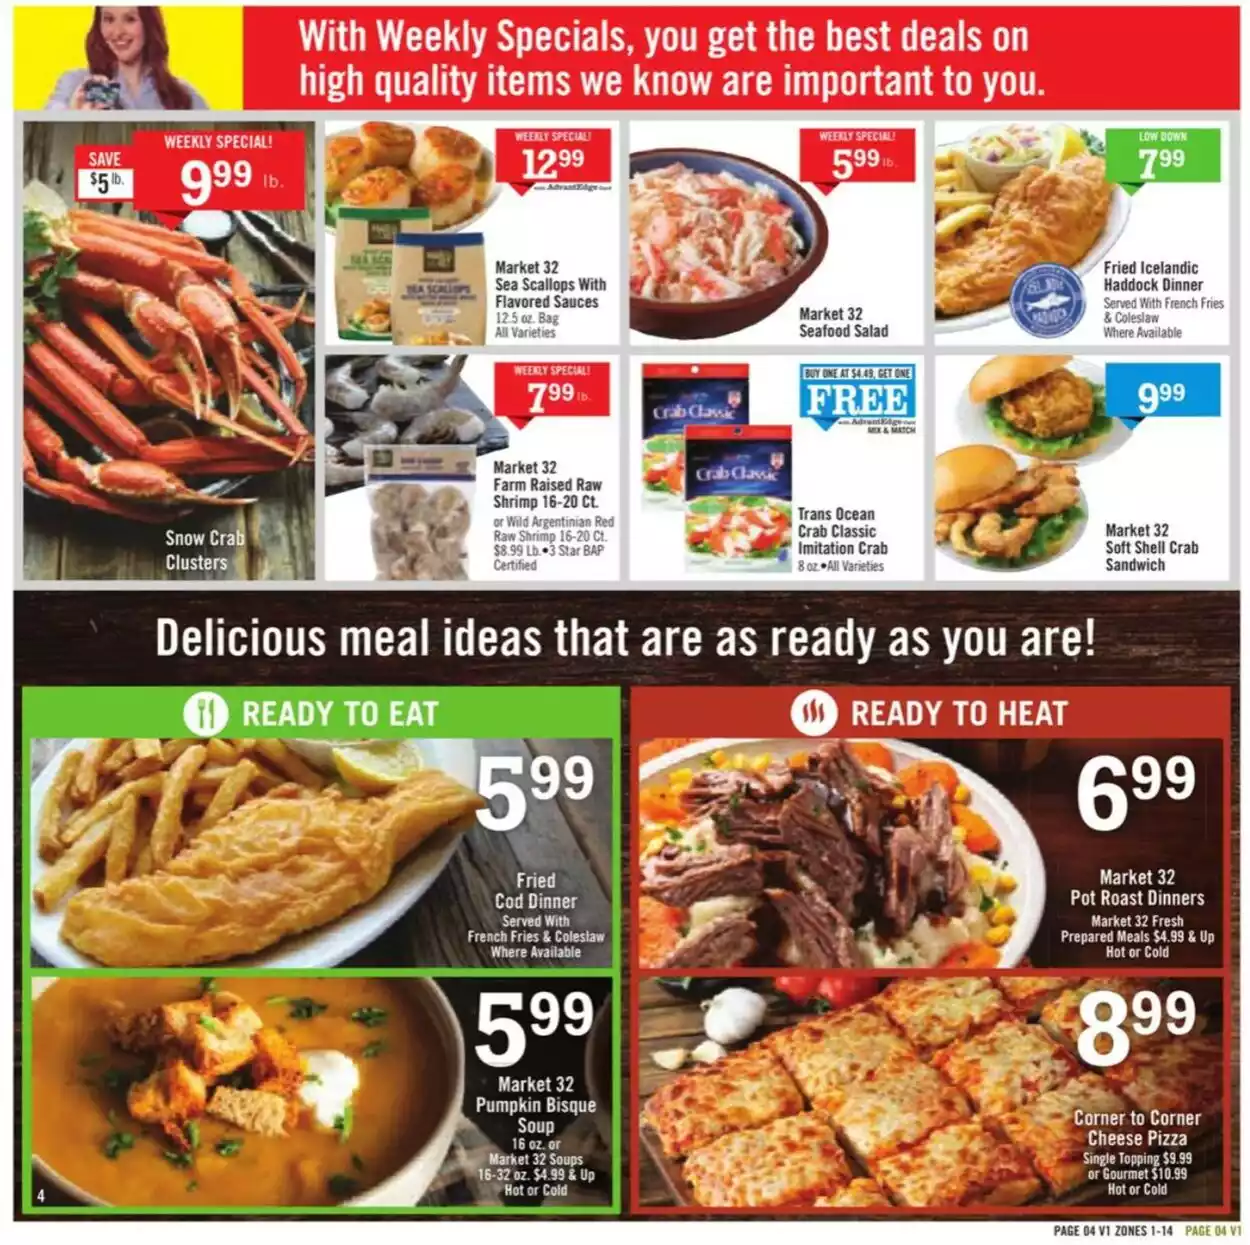 Price Chopper Weekly Ad Preview for March 26 - April 1, 2023 2